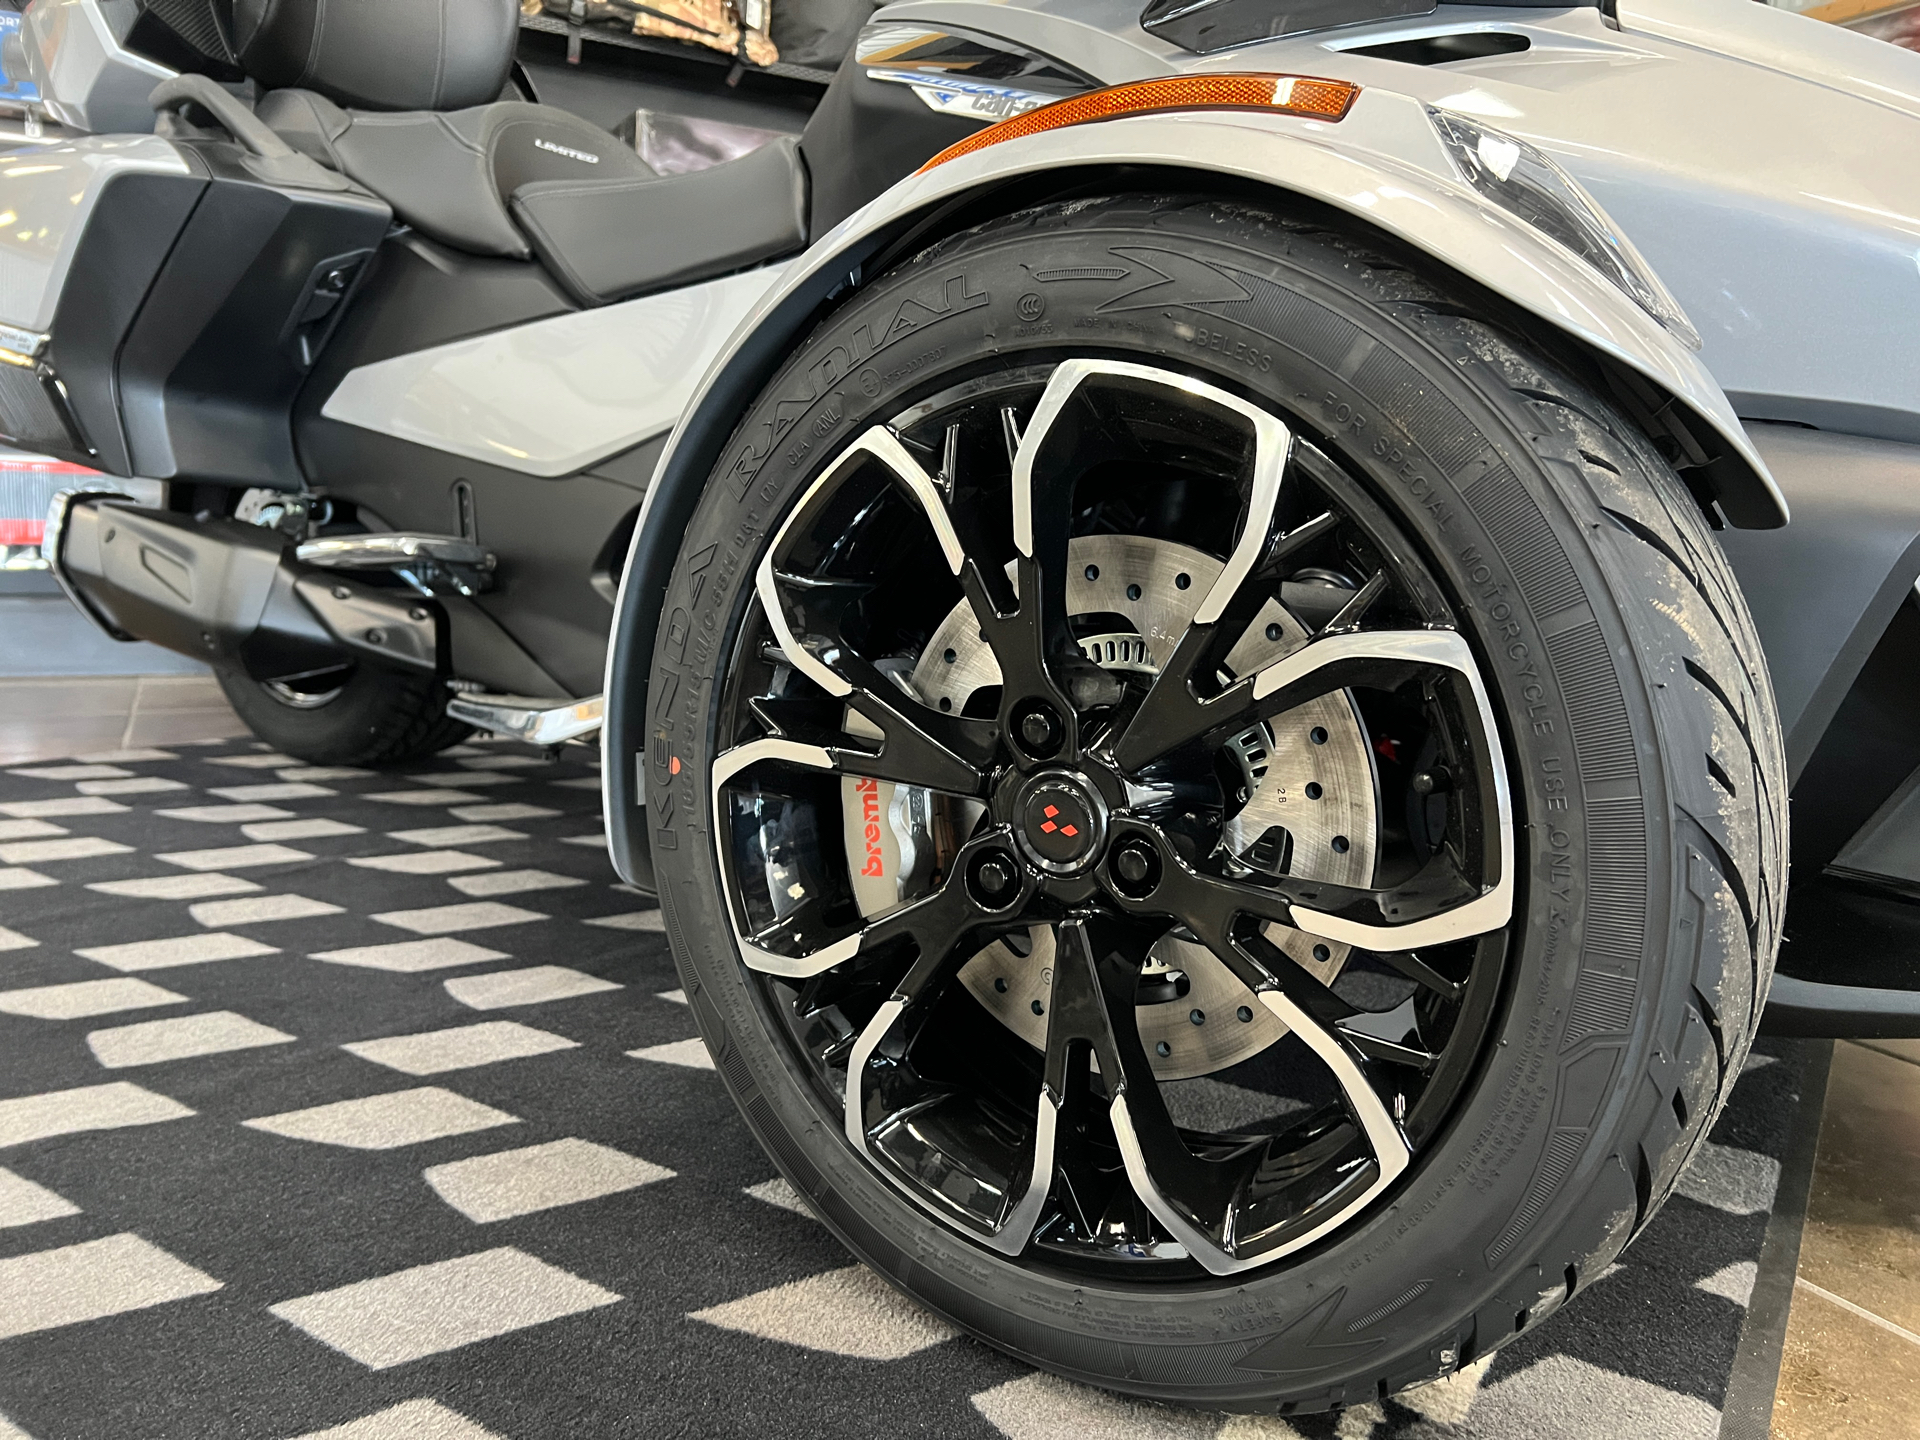 2022 Can-Am Spyder RT Limited in Panama City, Florida - Photo 3